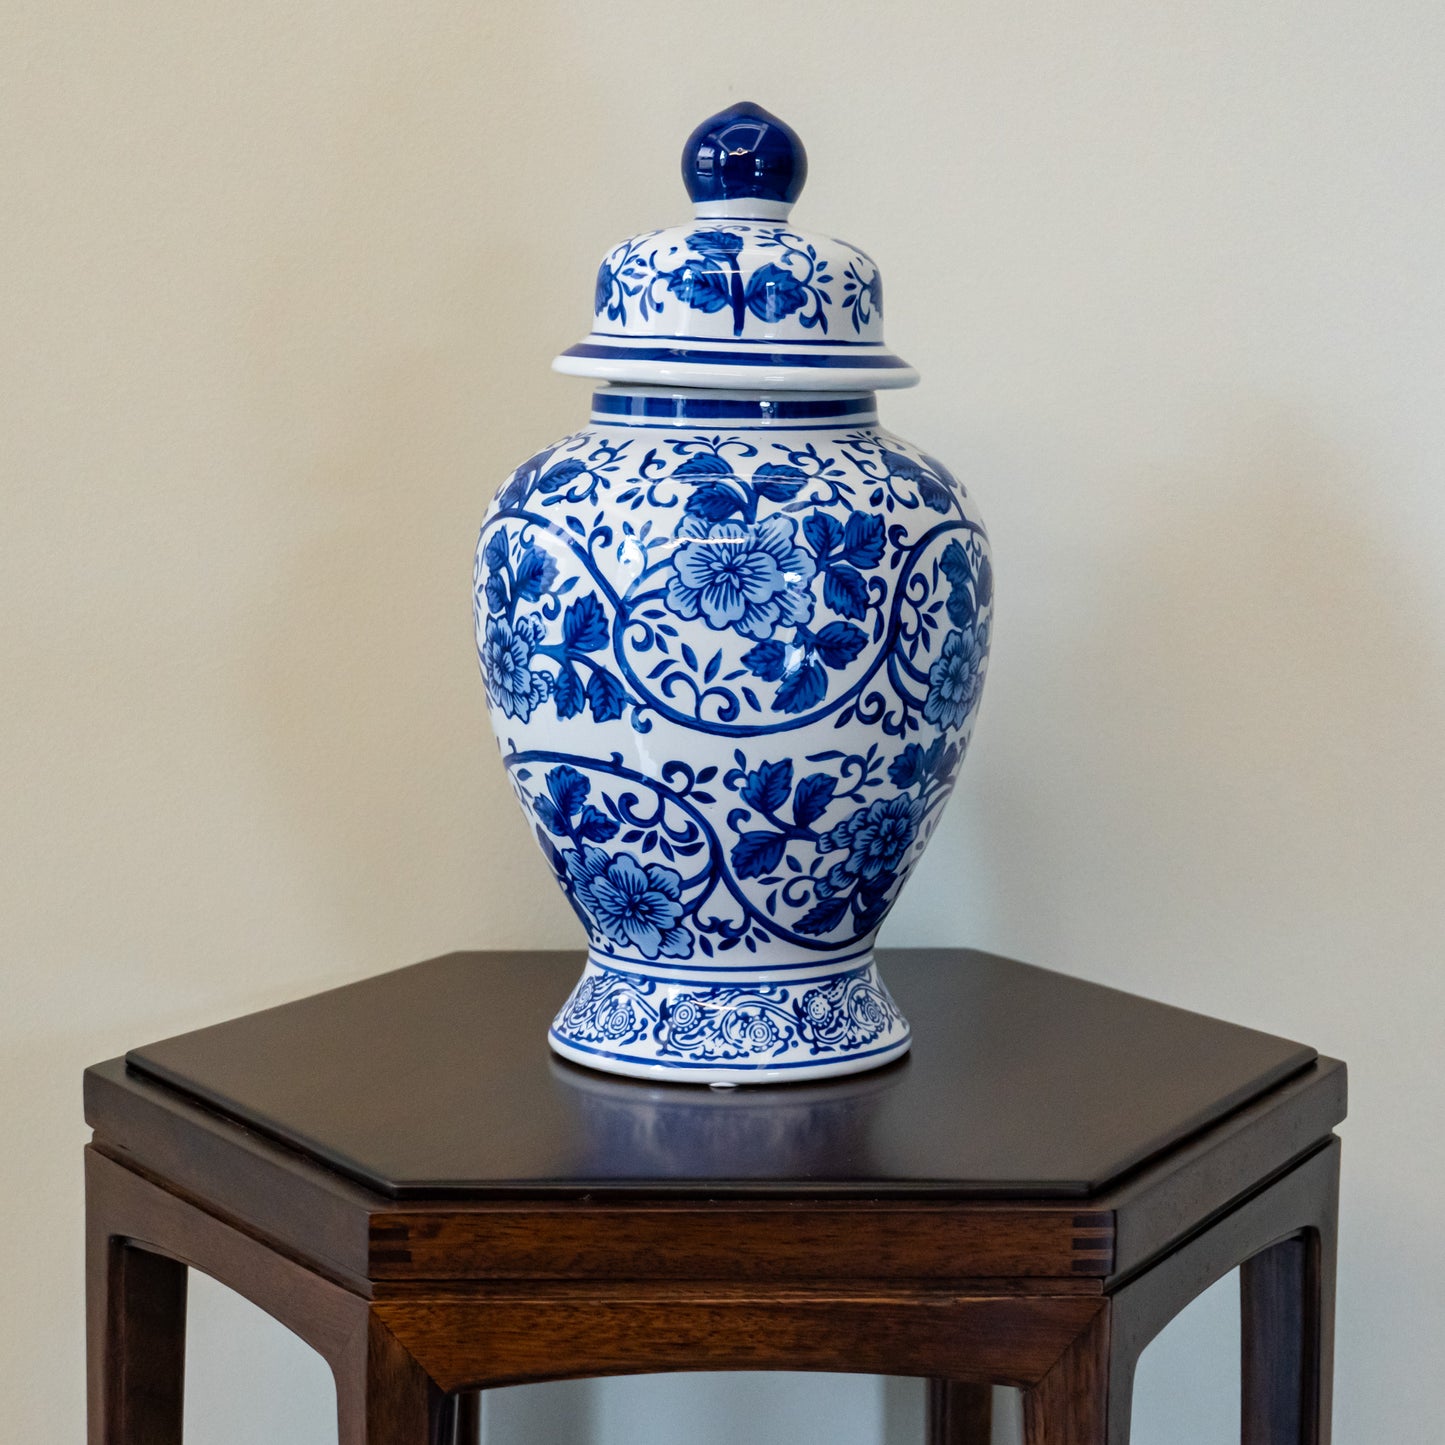 Floral Elegance Porcelain Jar - Majestic Blue & White Chinoiserie Vase with Lid - Ornate Home Decor Accent